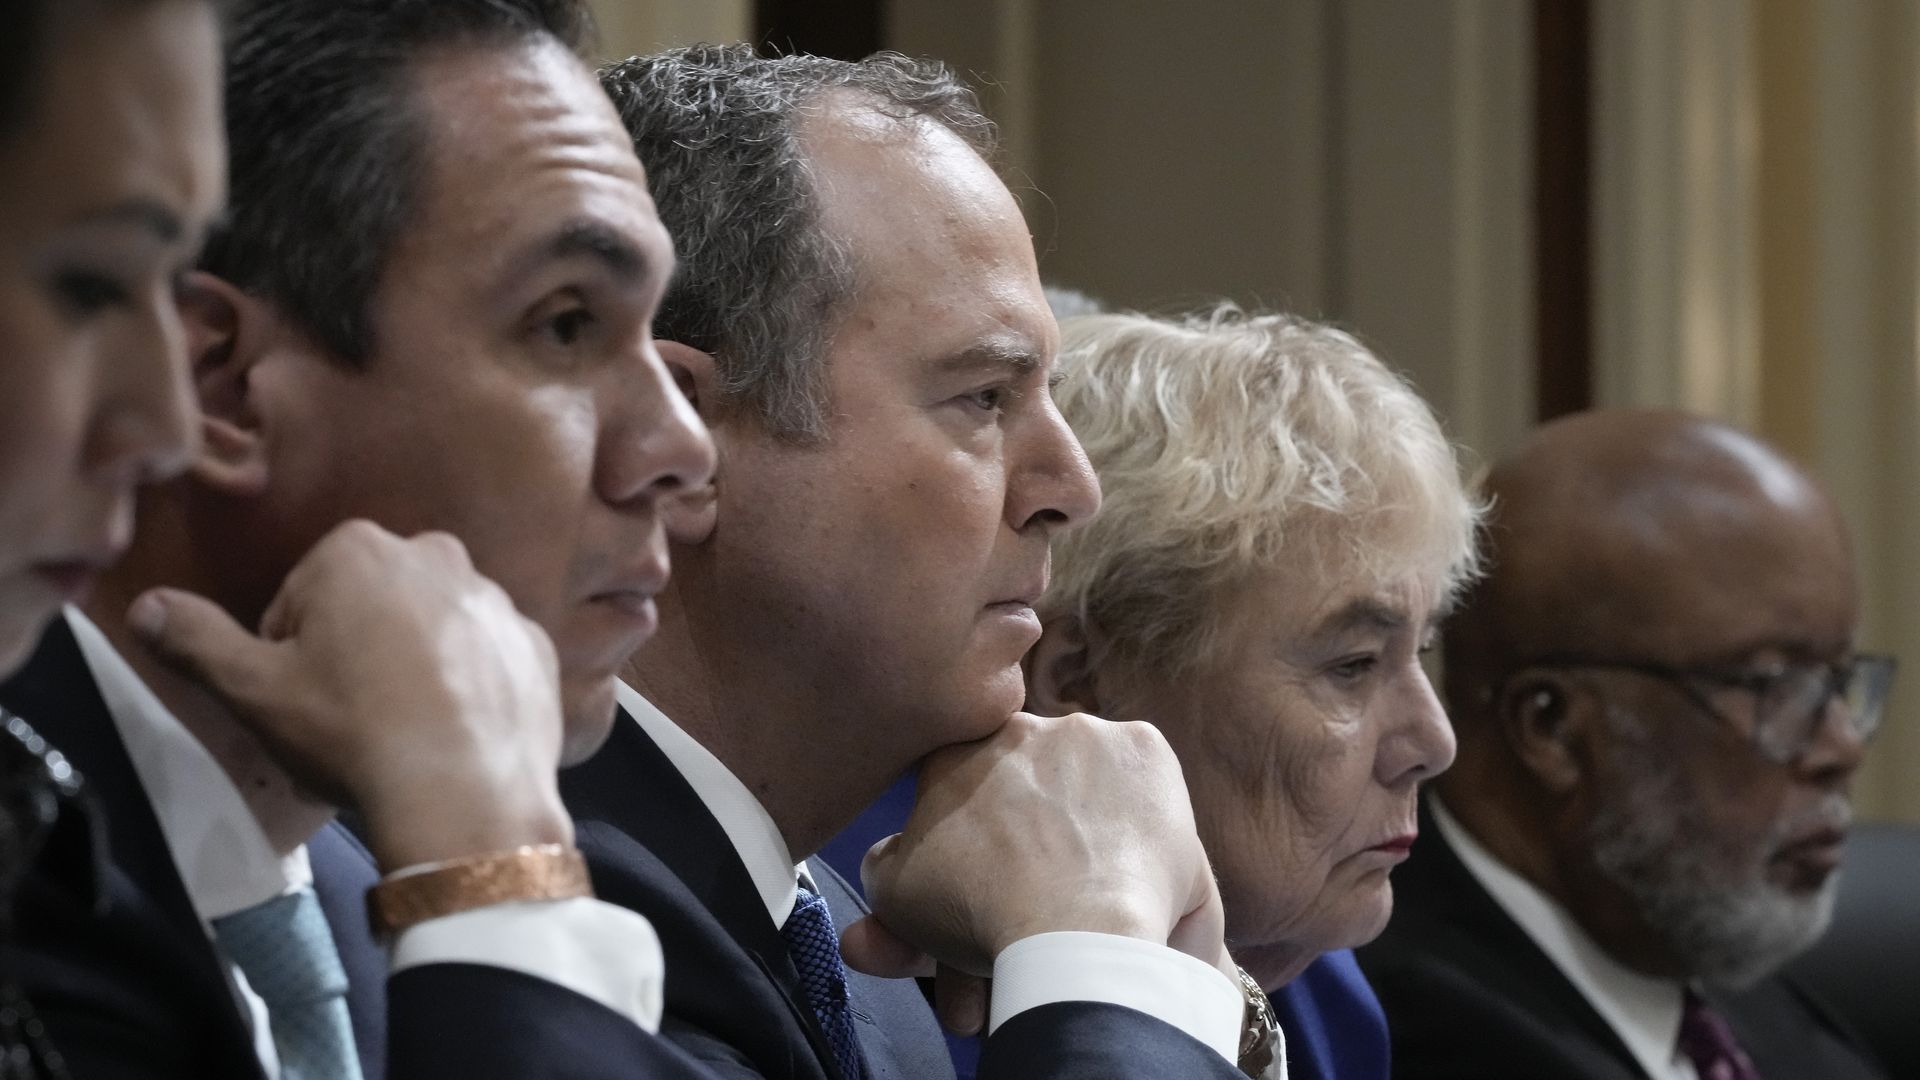 Jan. 6 committee members Stephanie Murphy, Pete Aguilar, Adam Schiff, Zoe Lofgren and Bennie Thompson sit at the dais at a committee hearing.